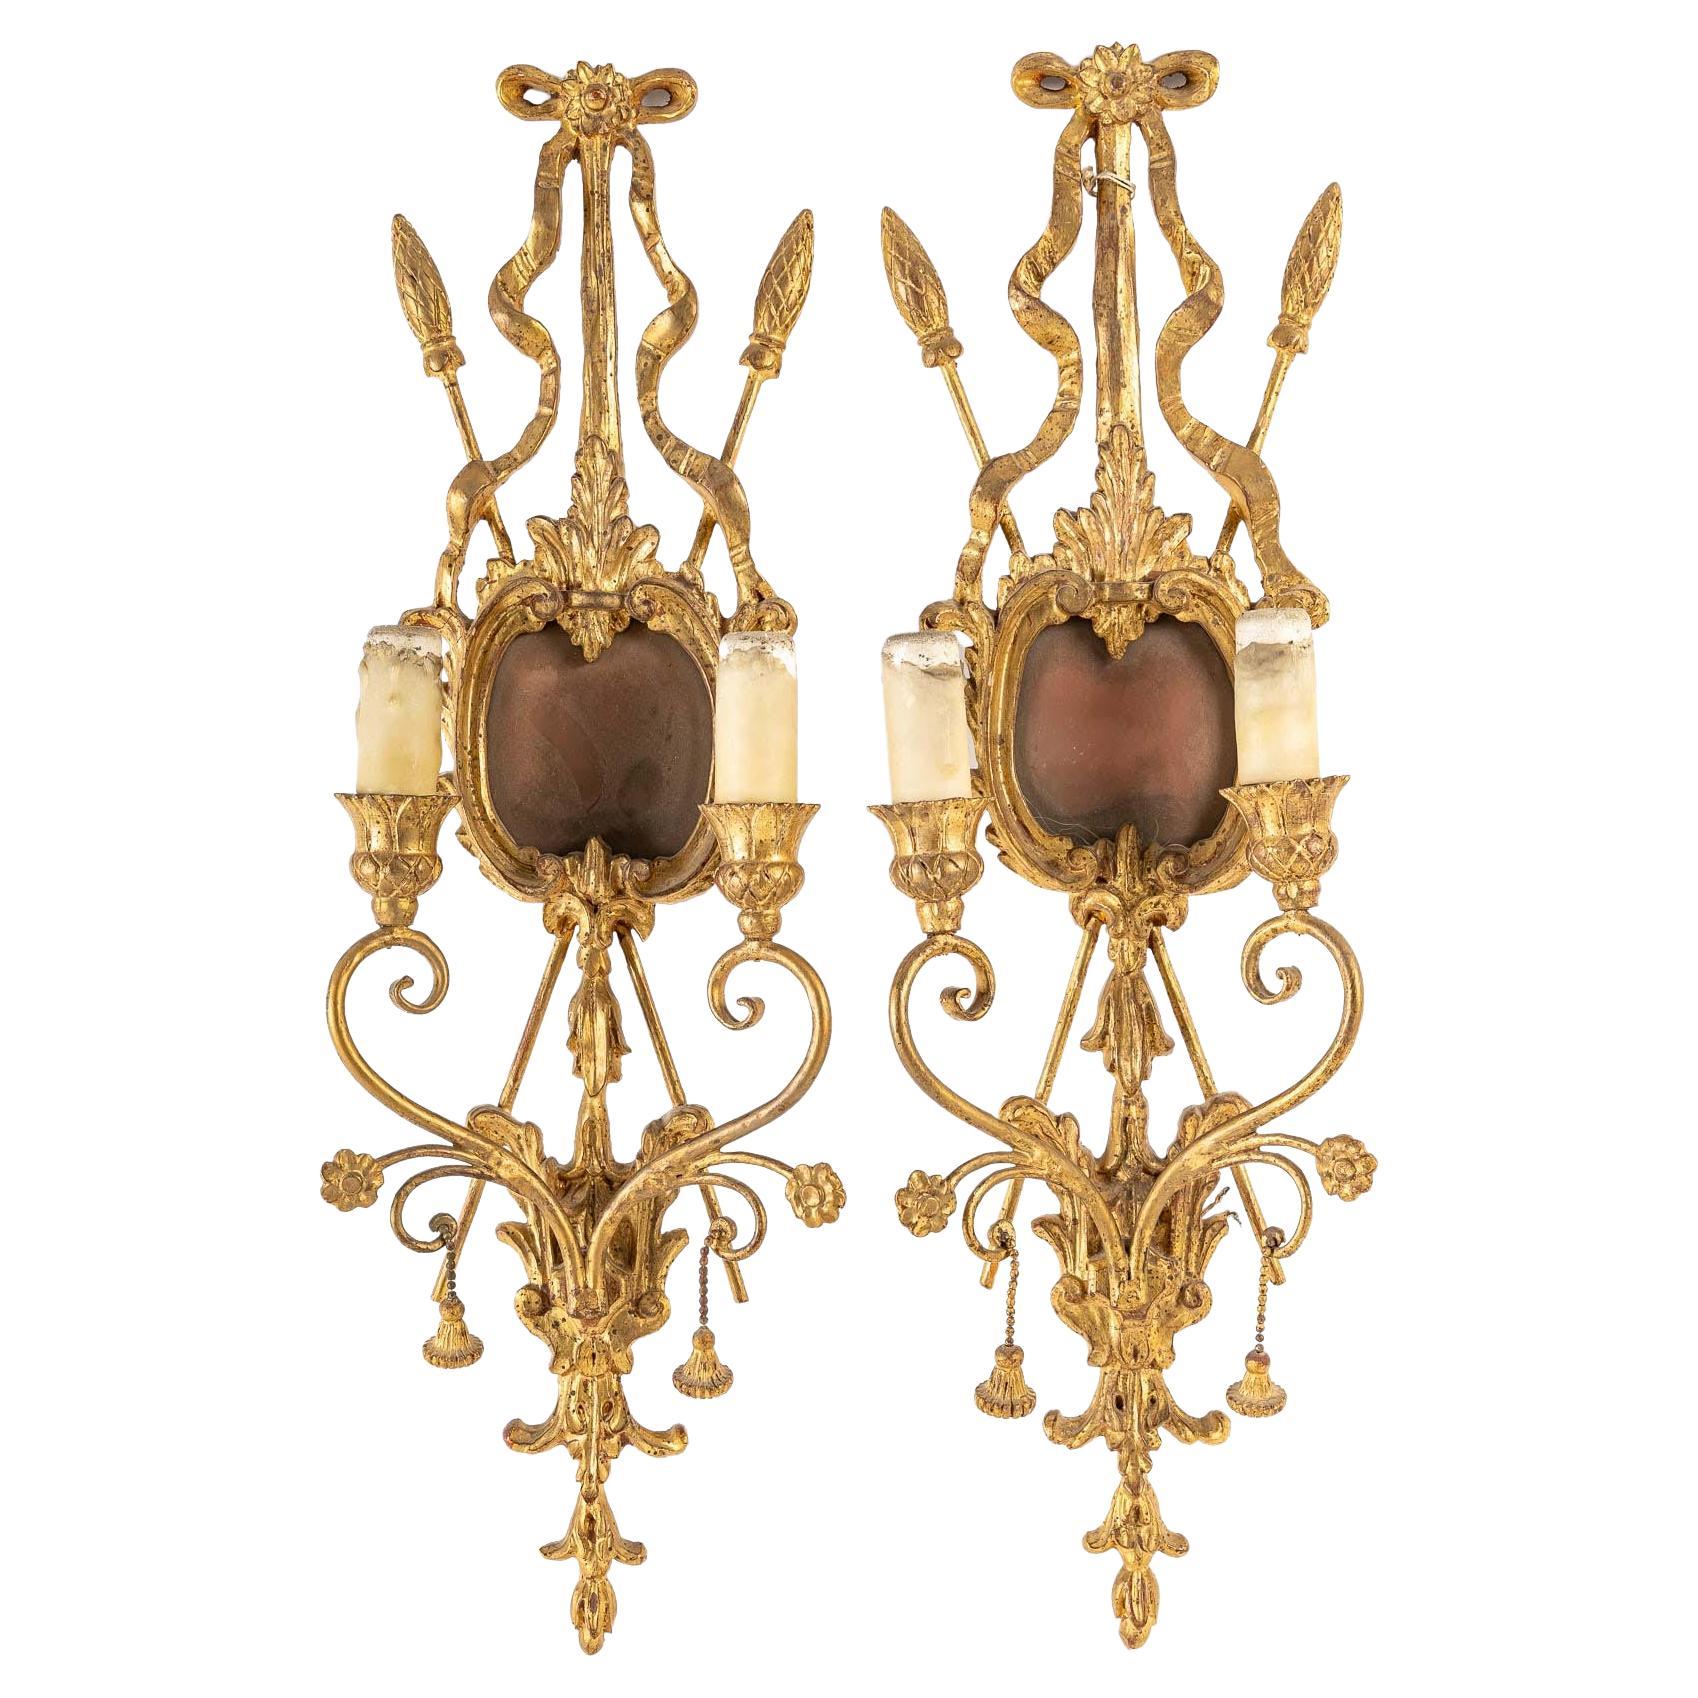 Pair of Carved and Gilded Wood Sconces, Italian work